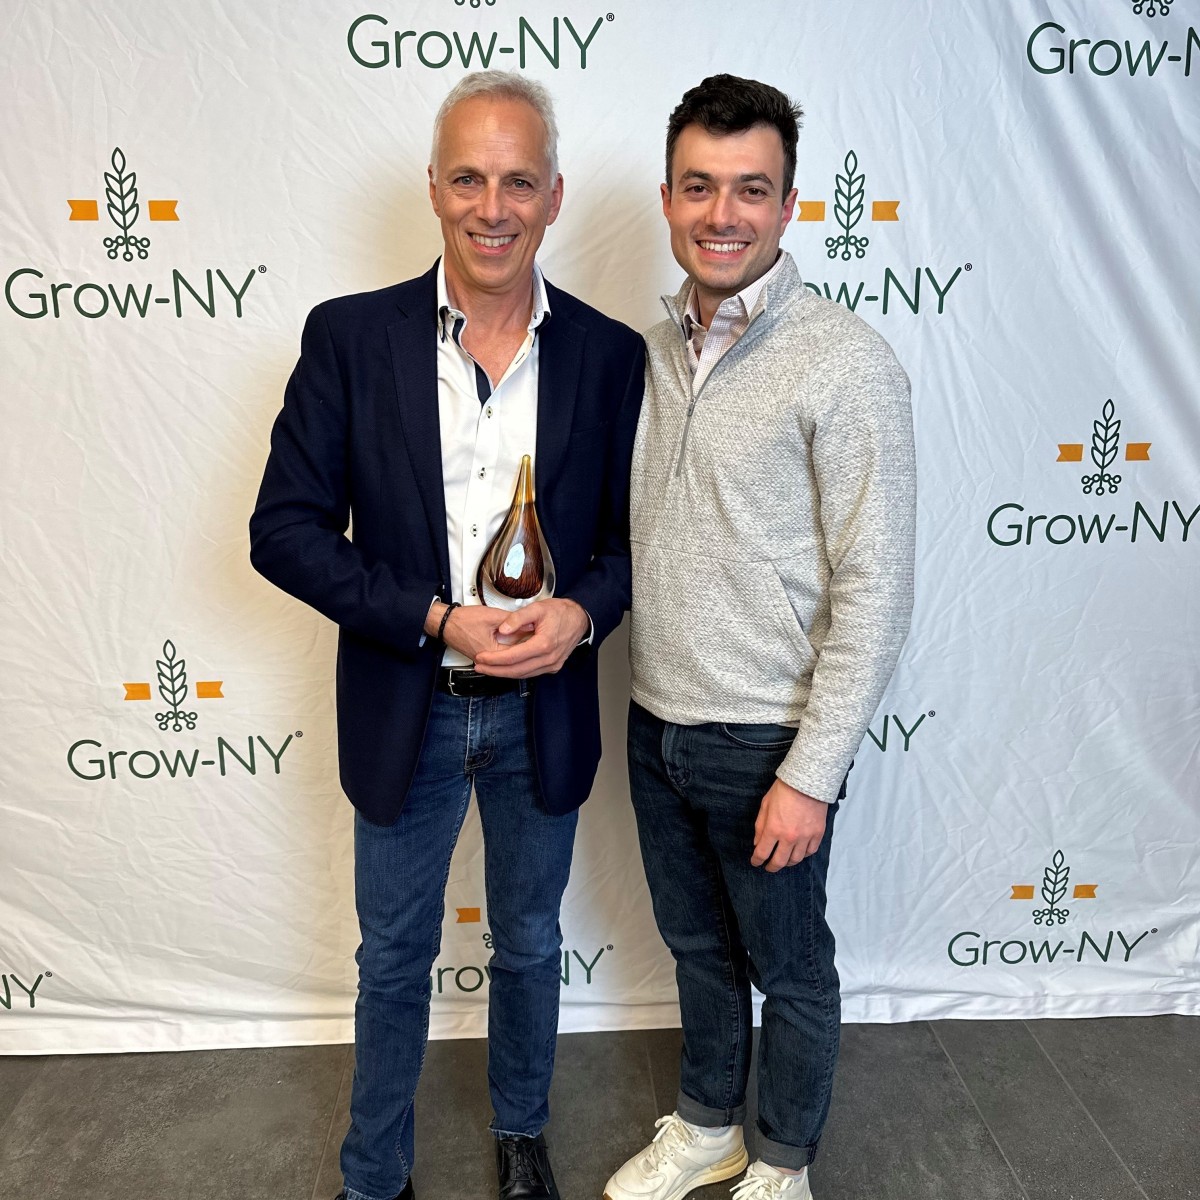 Hypercell Technologies wins $1 million at global Grow-NY food and ag competition